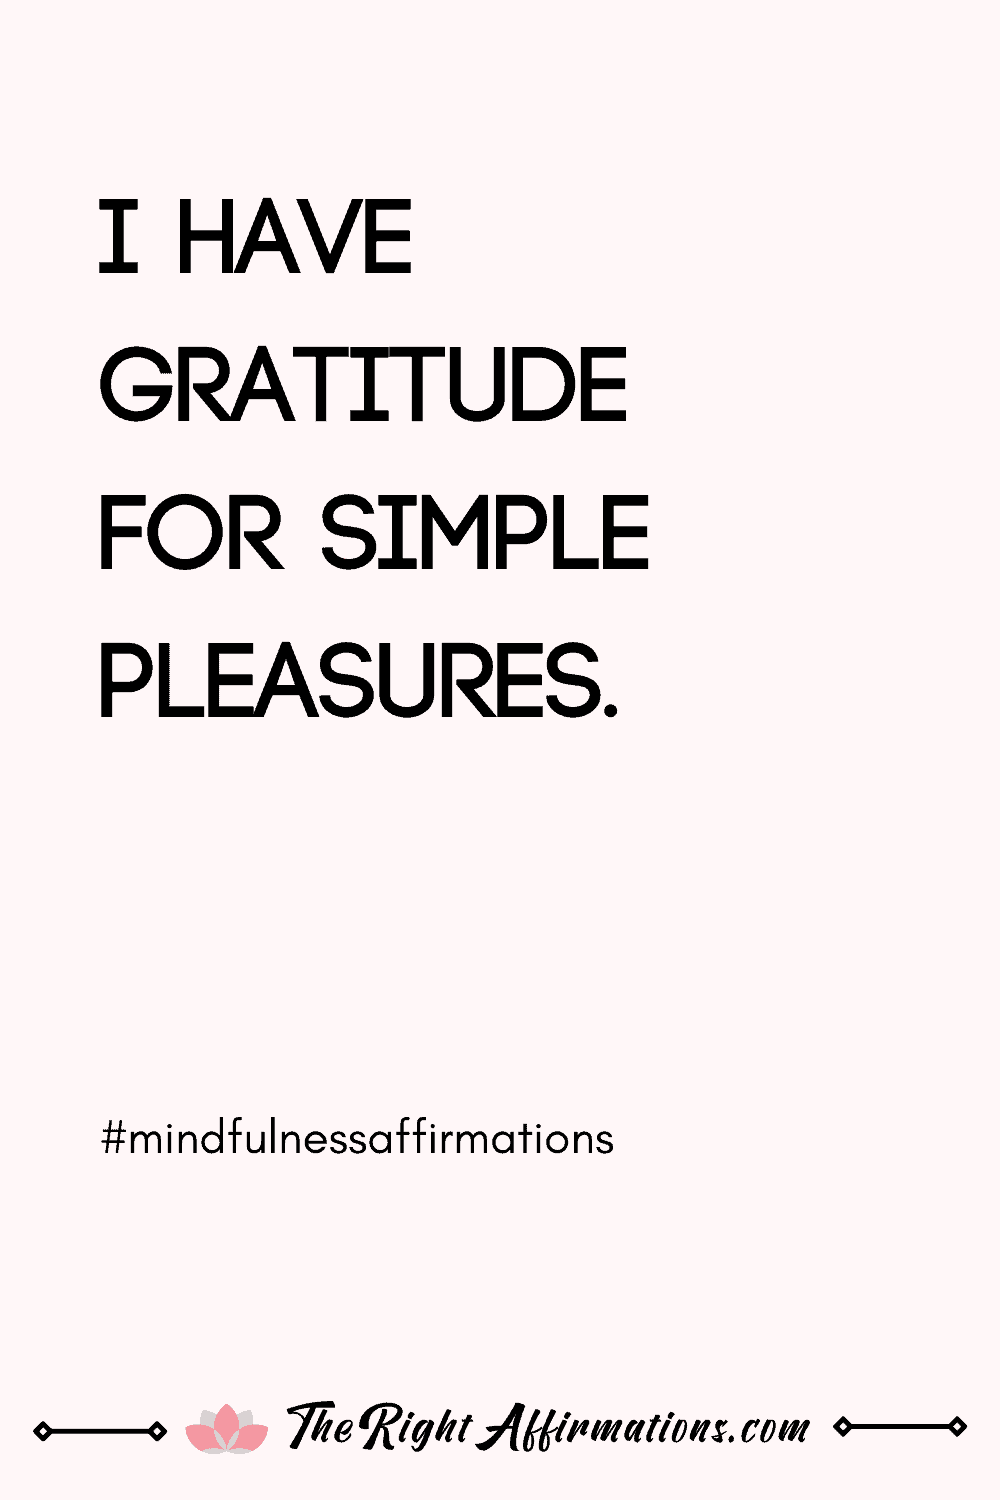 I have gratitude for simple pleasures. affirmation to be more mindful